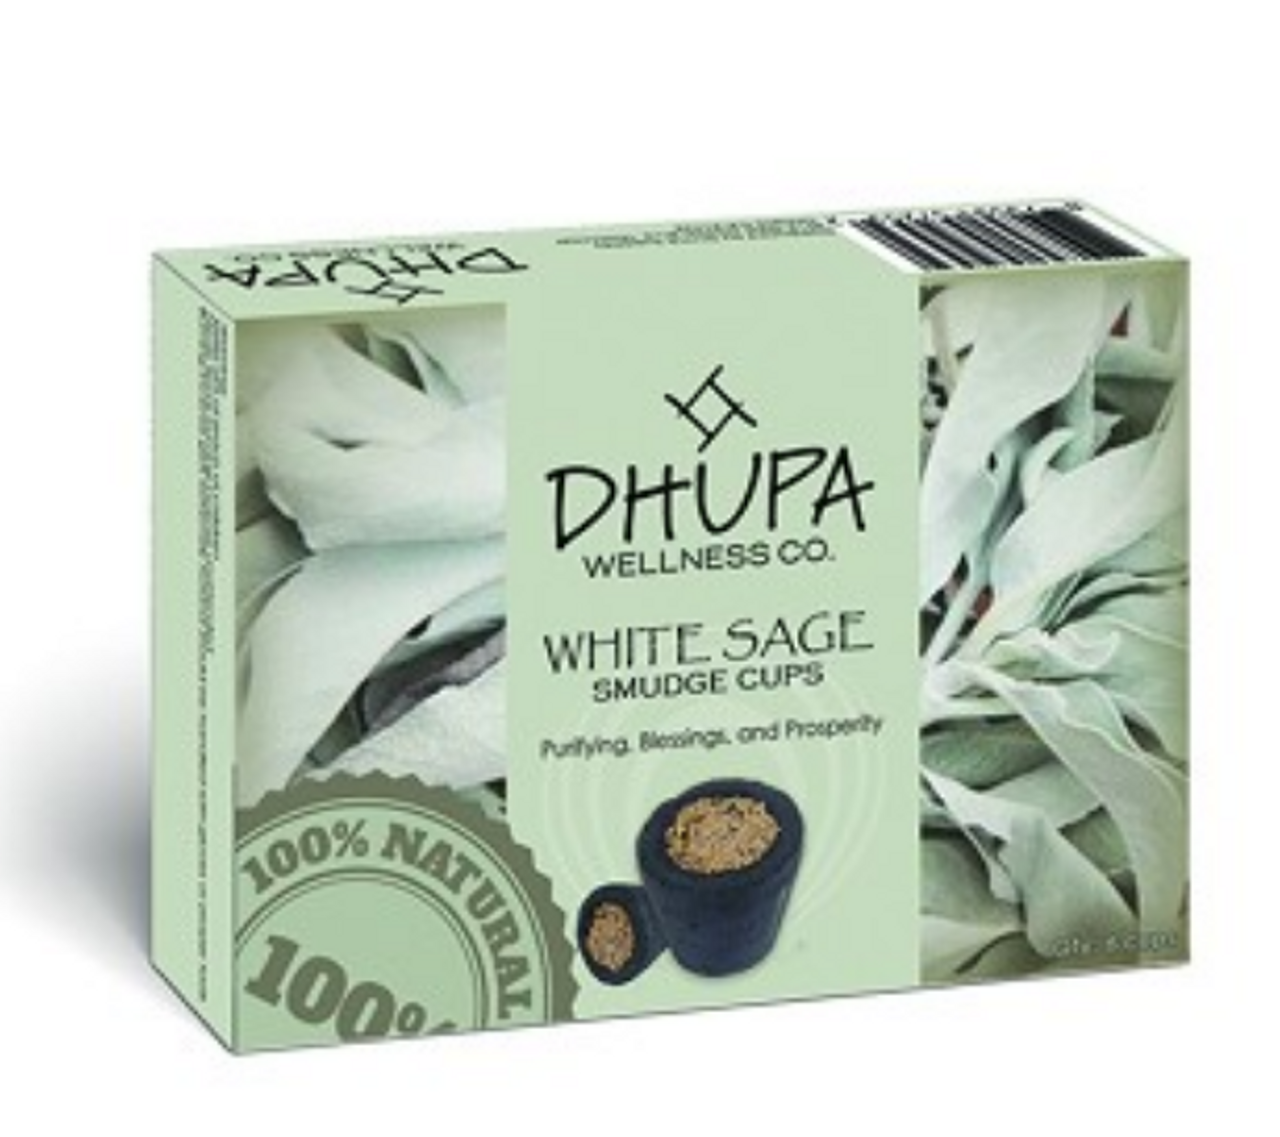 Incense Cup or Smudge Cup Dhupa Brand